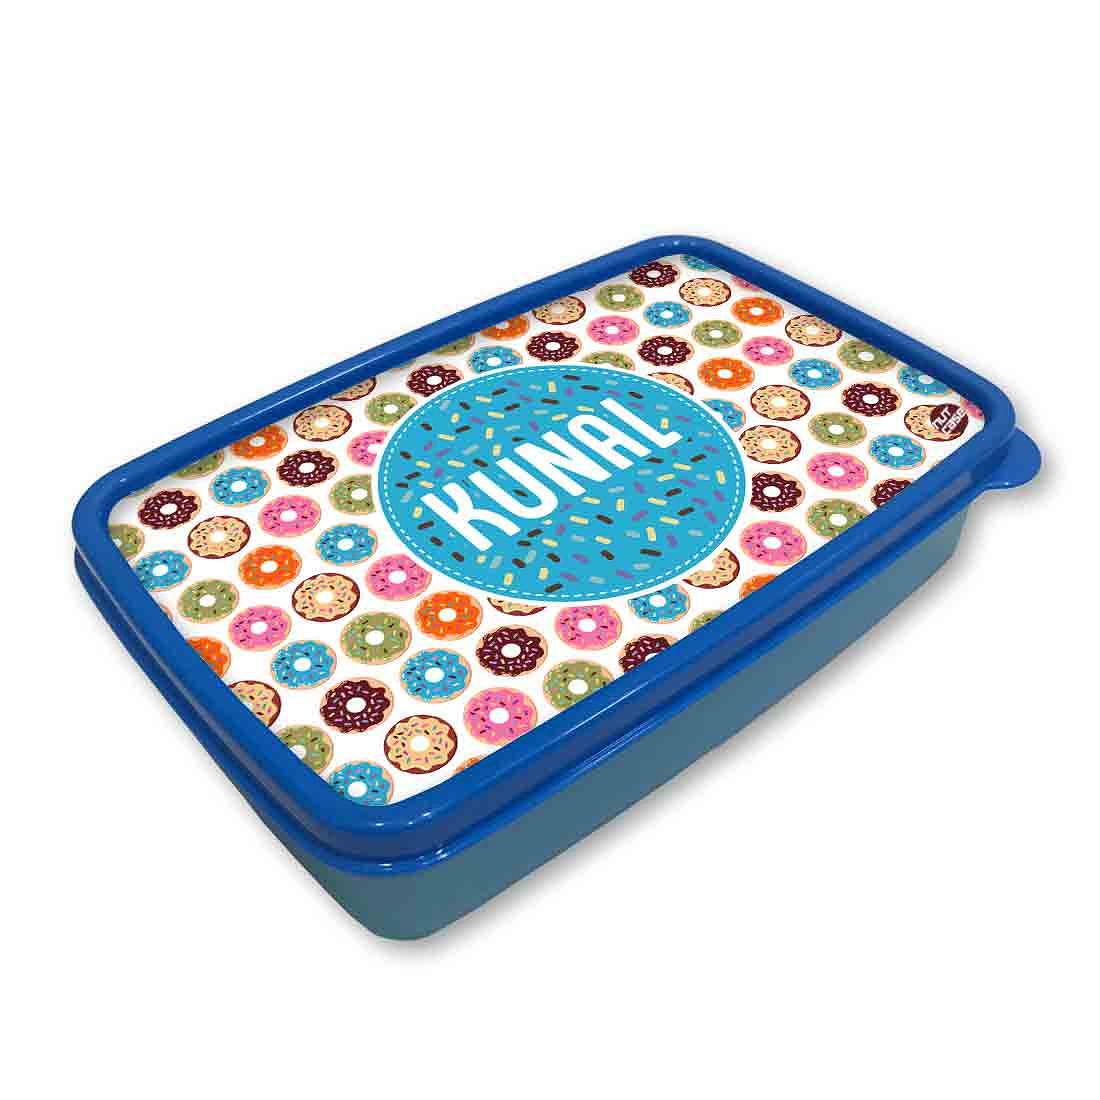 Personalised Snack Box for Boys Plastic Lunch Box - Sweet Doughnut Nutcase